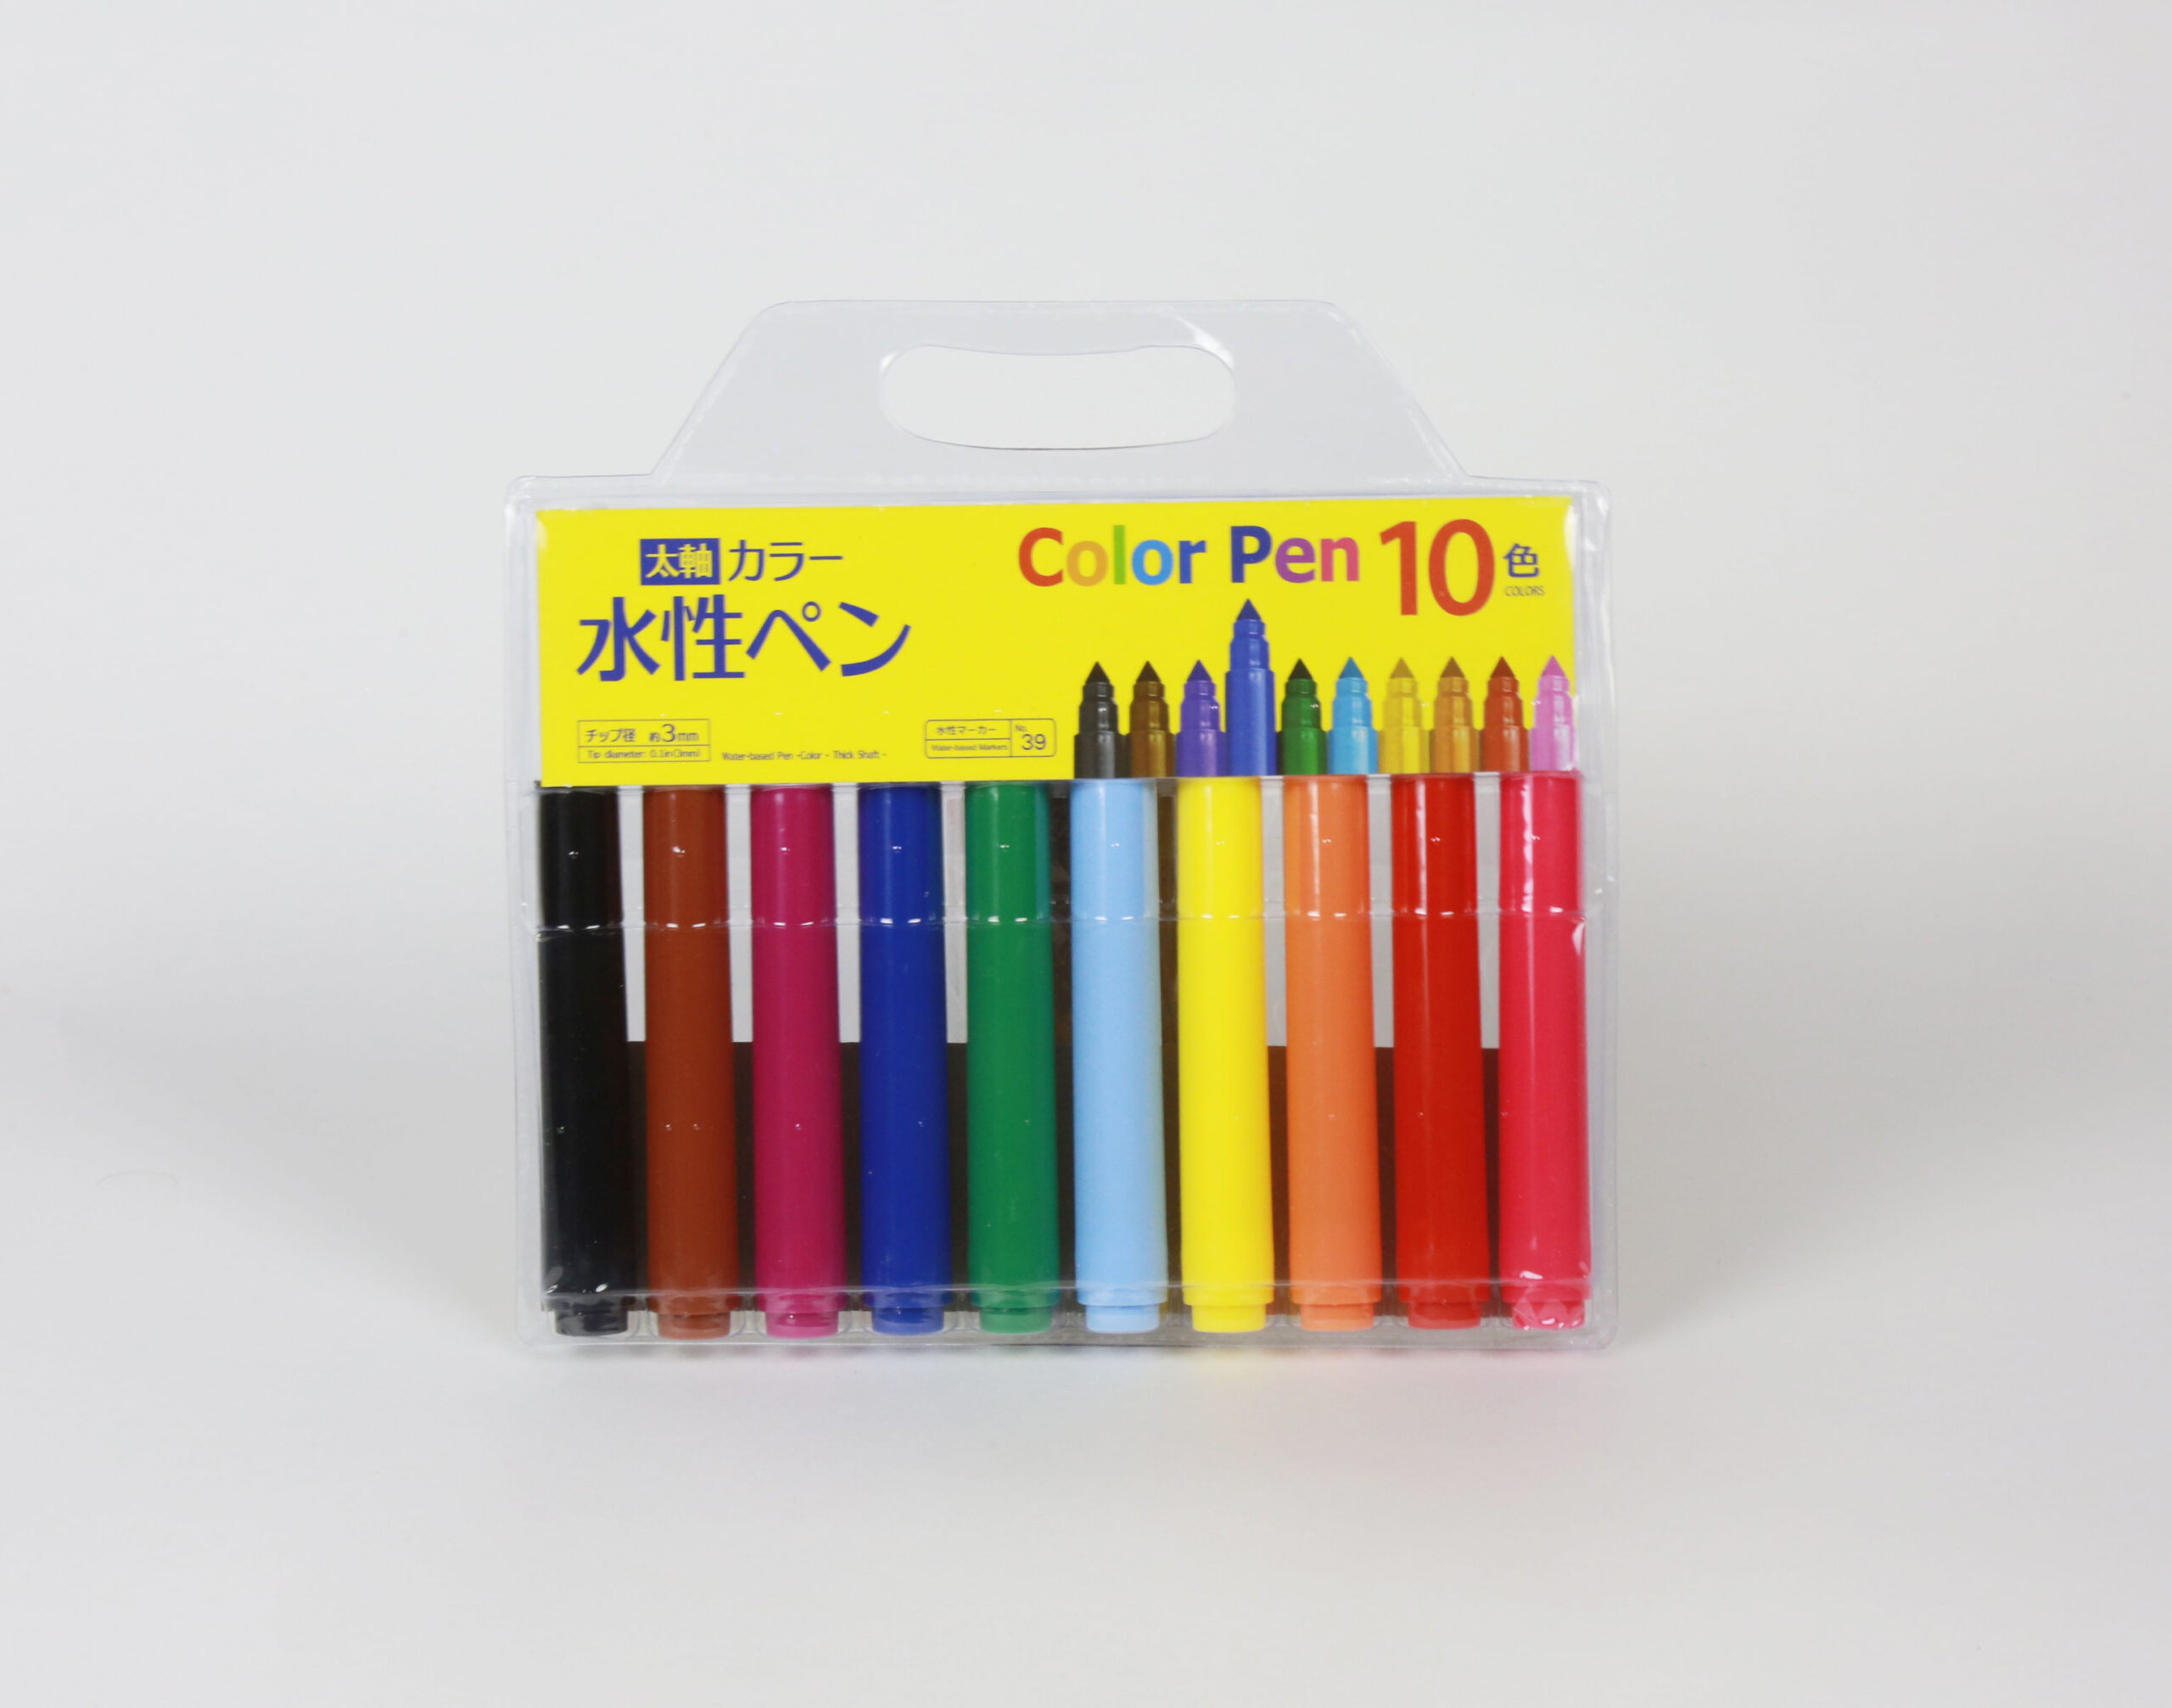 Water Based Magic Marker Pens - 10 Colors Included - Daiso Japan Middle East